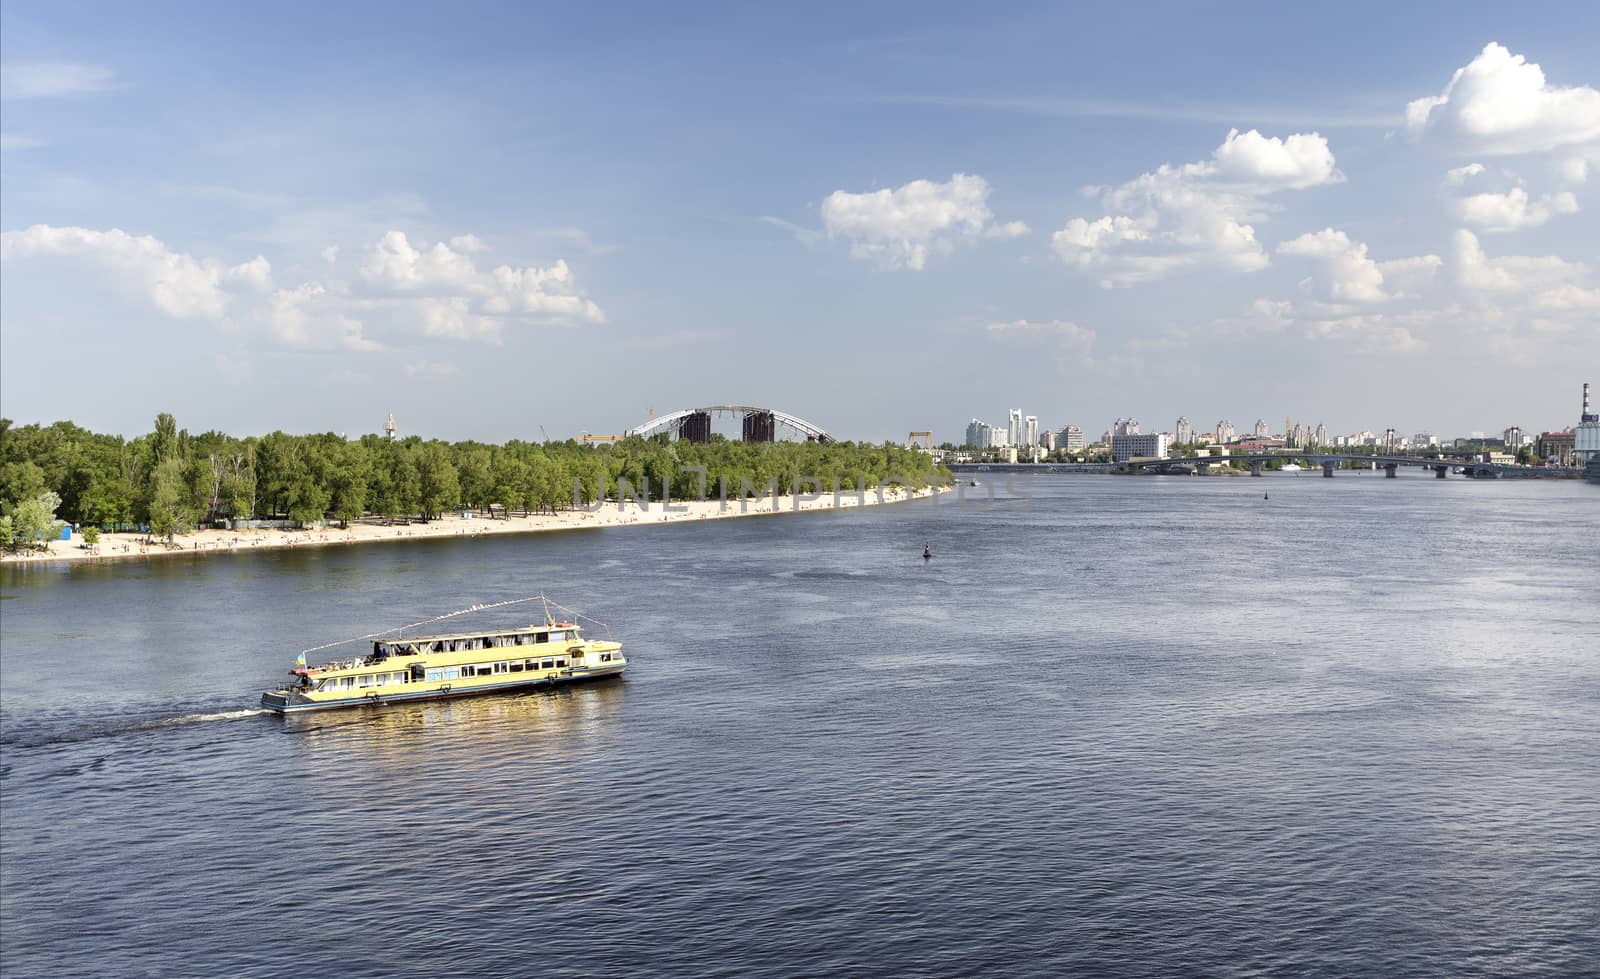 Pleasure boat goes along the Dnieper river on a bright sunny day by Sergii